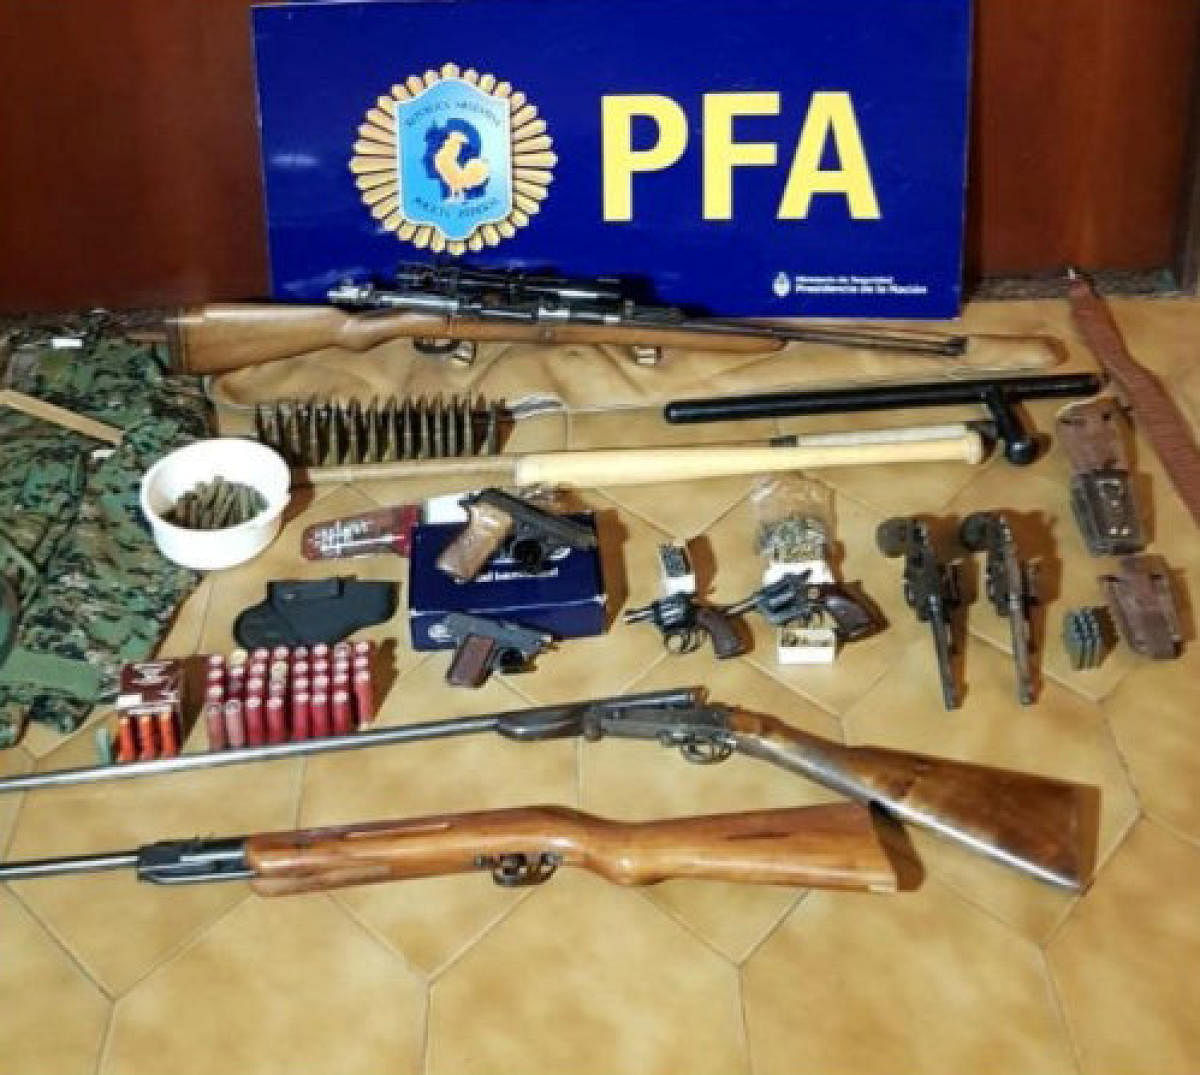 Weapons and ammunition that were found by Argentine police at the residence of two Argentine citizens with suspected links to Lebanon's Hezbollah militia are seen at the police headquarters in Buenos Aires. Reuters photo 